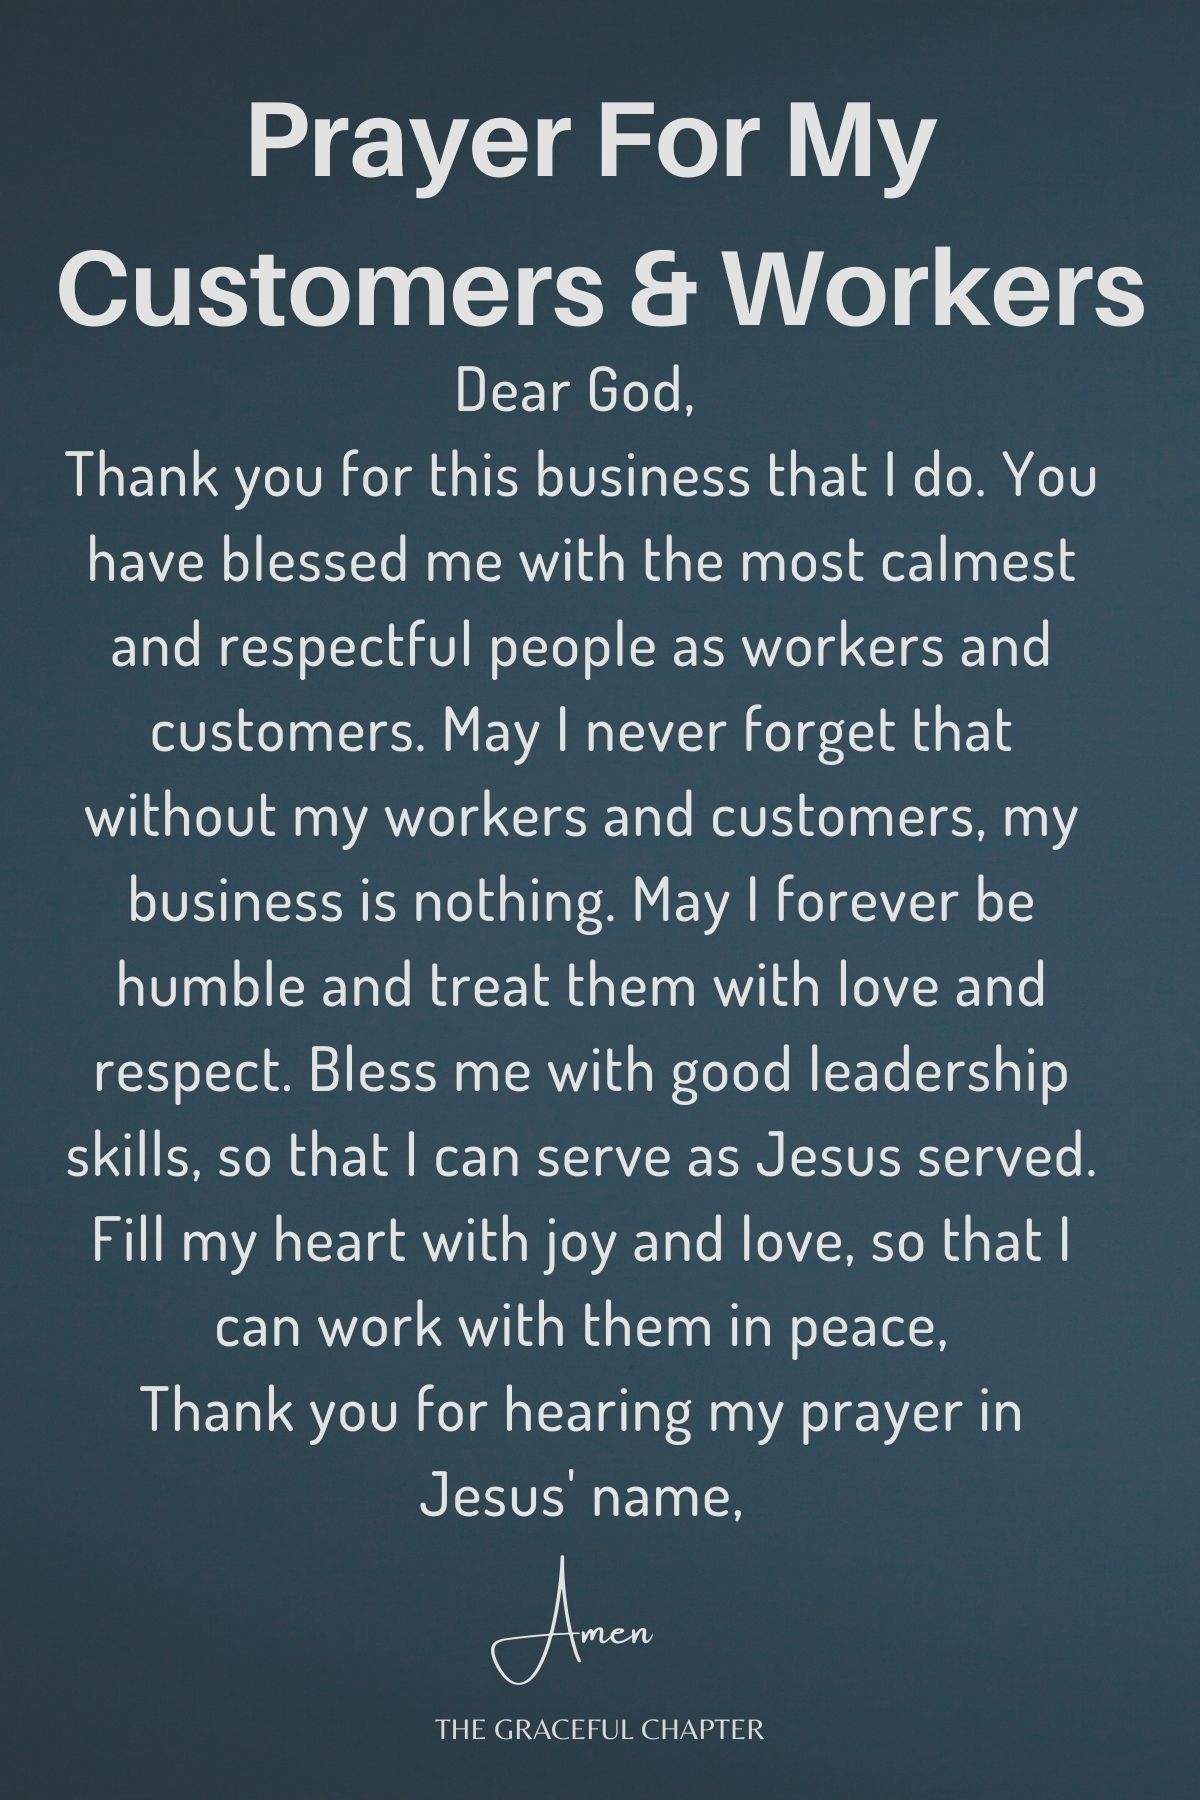 Prayers for my business - for my customers and my workers